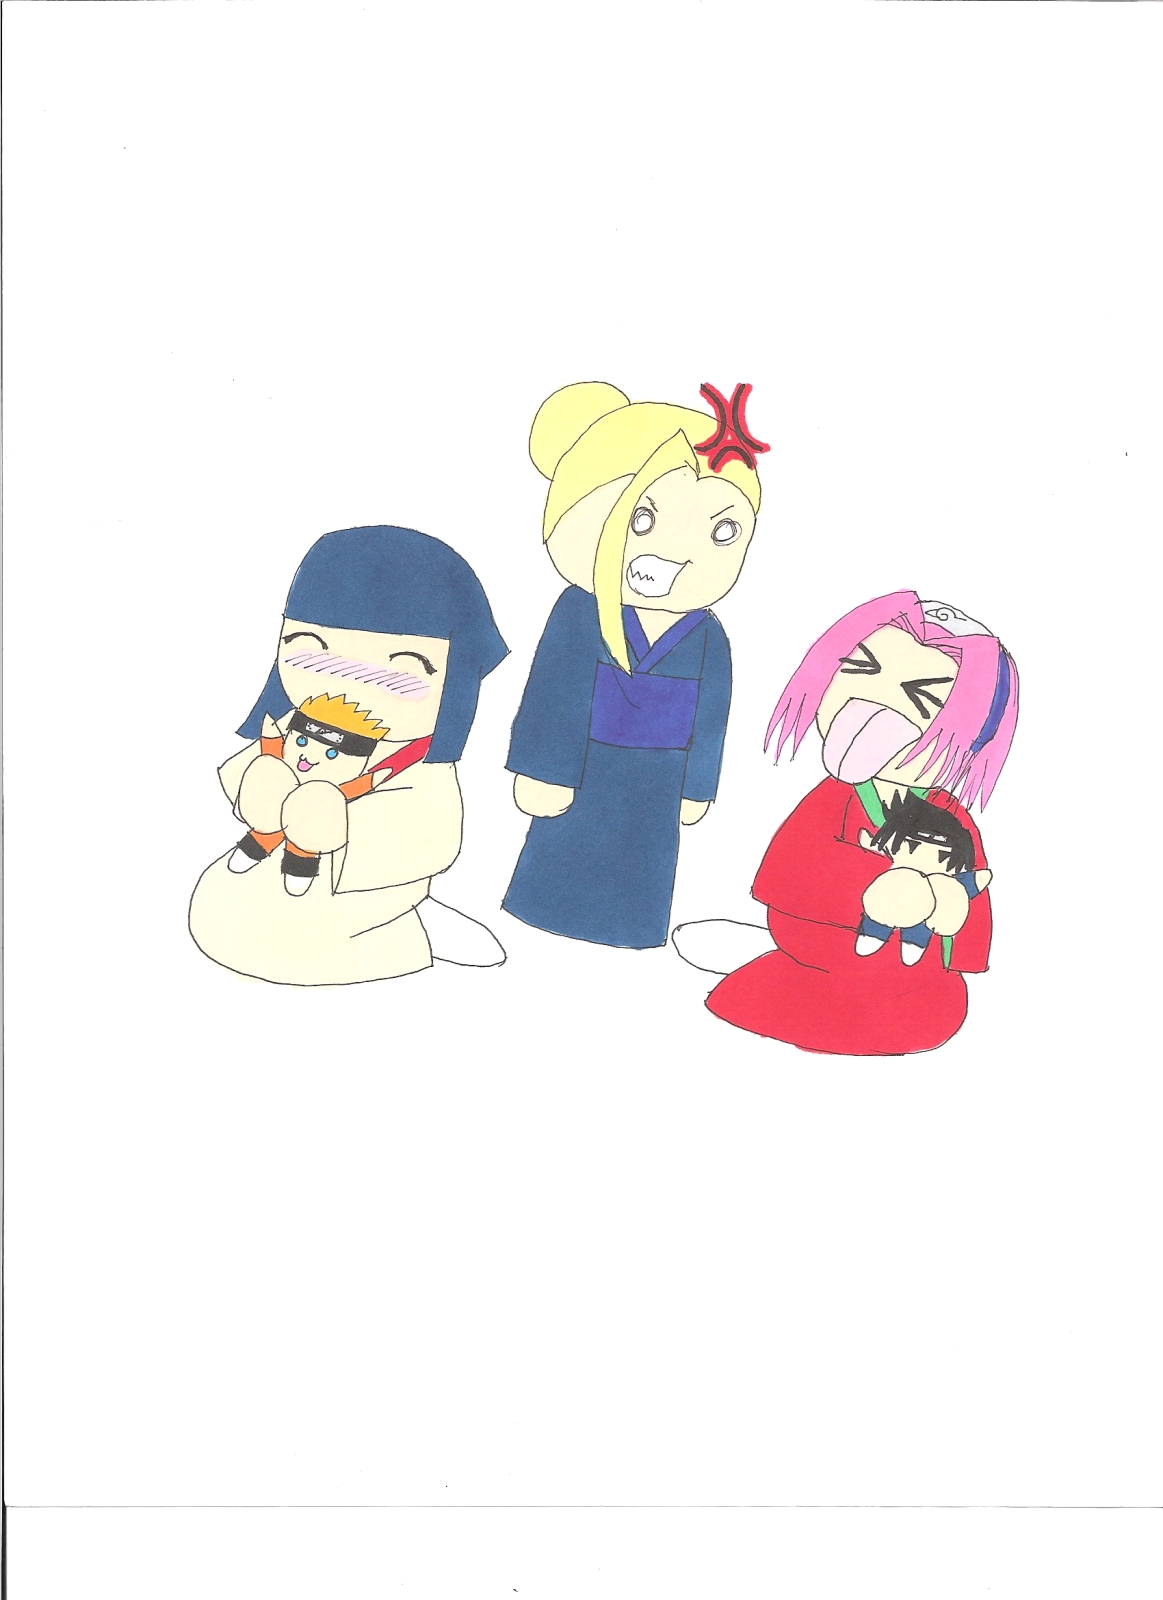 Kunoichi Love (contest entry for Zoey101) by chichirifan92